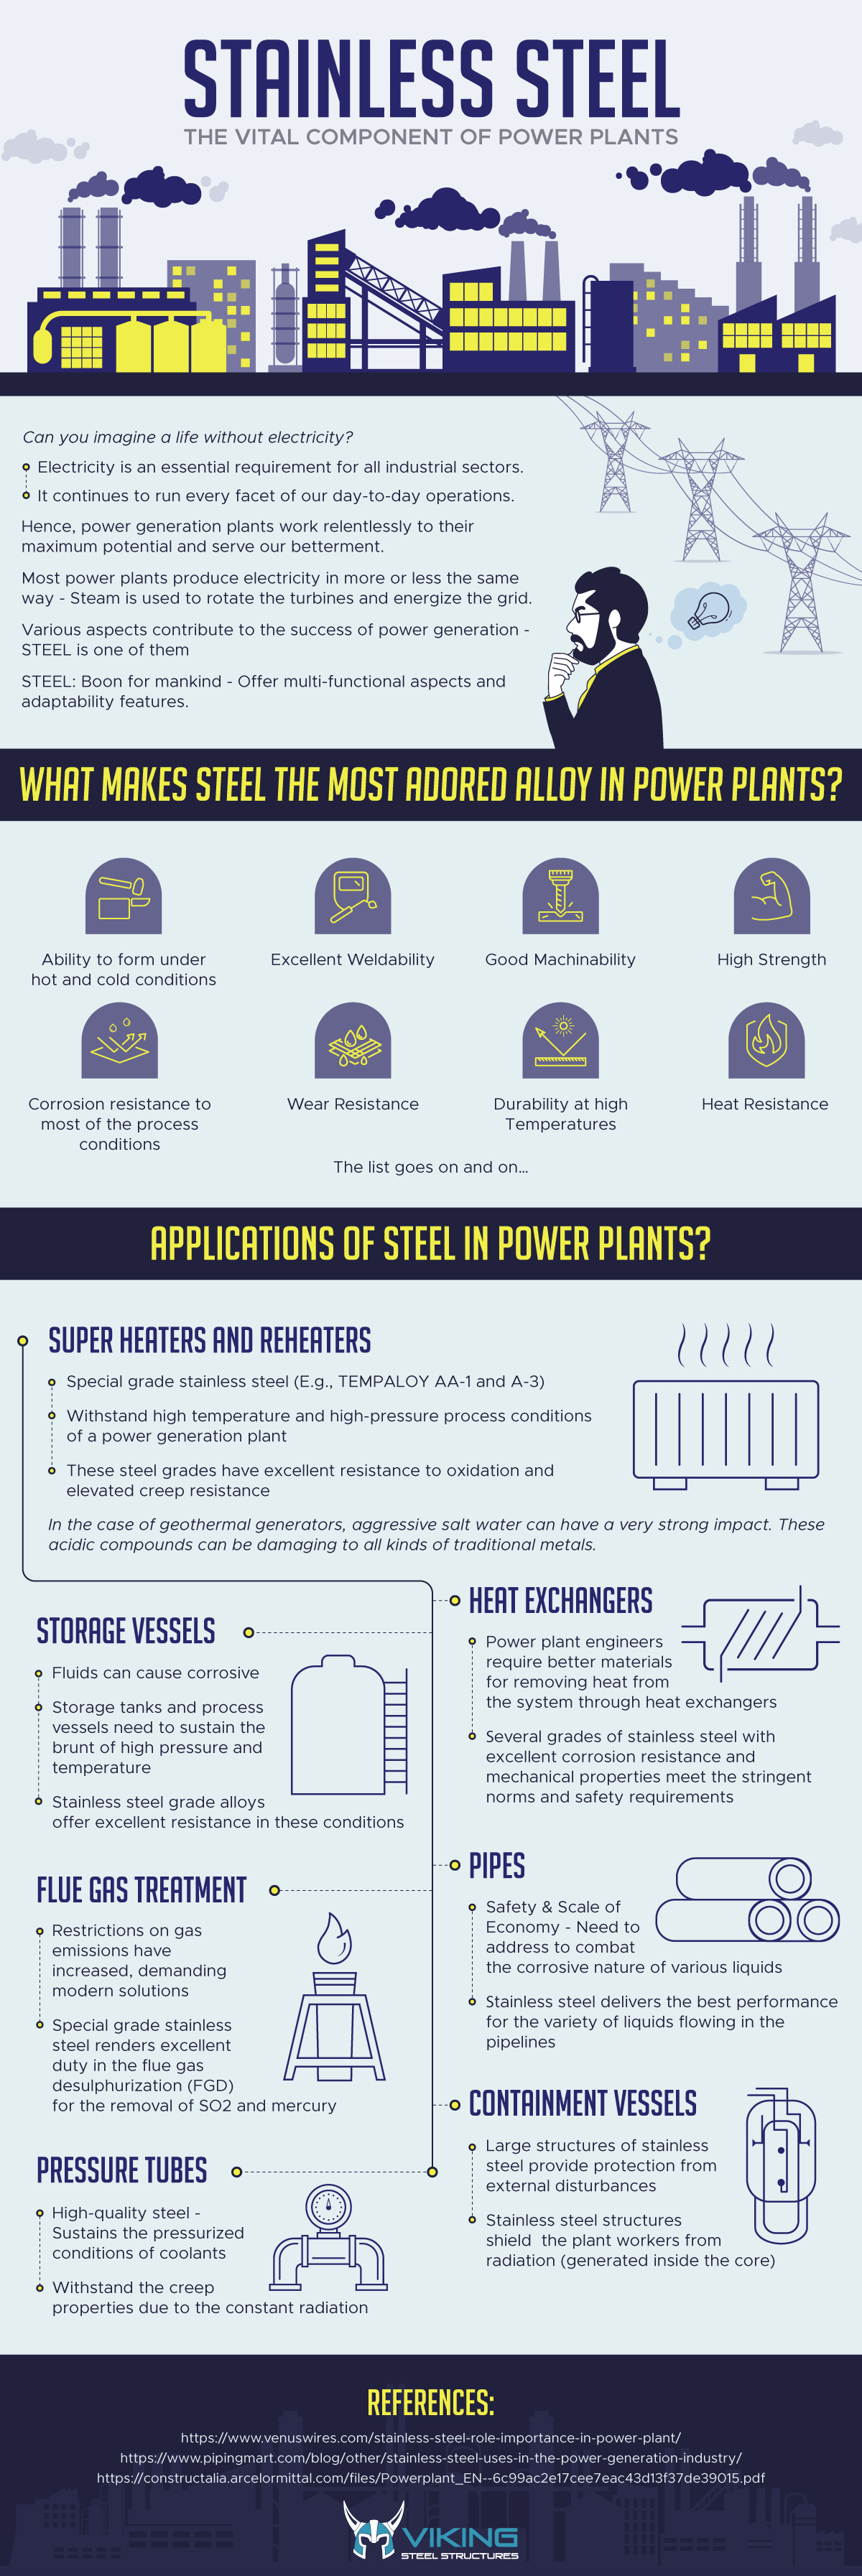 Stainless Steel - The Vital Component of Power Plants